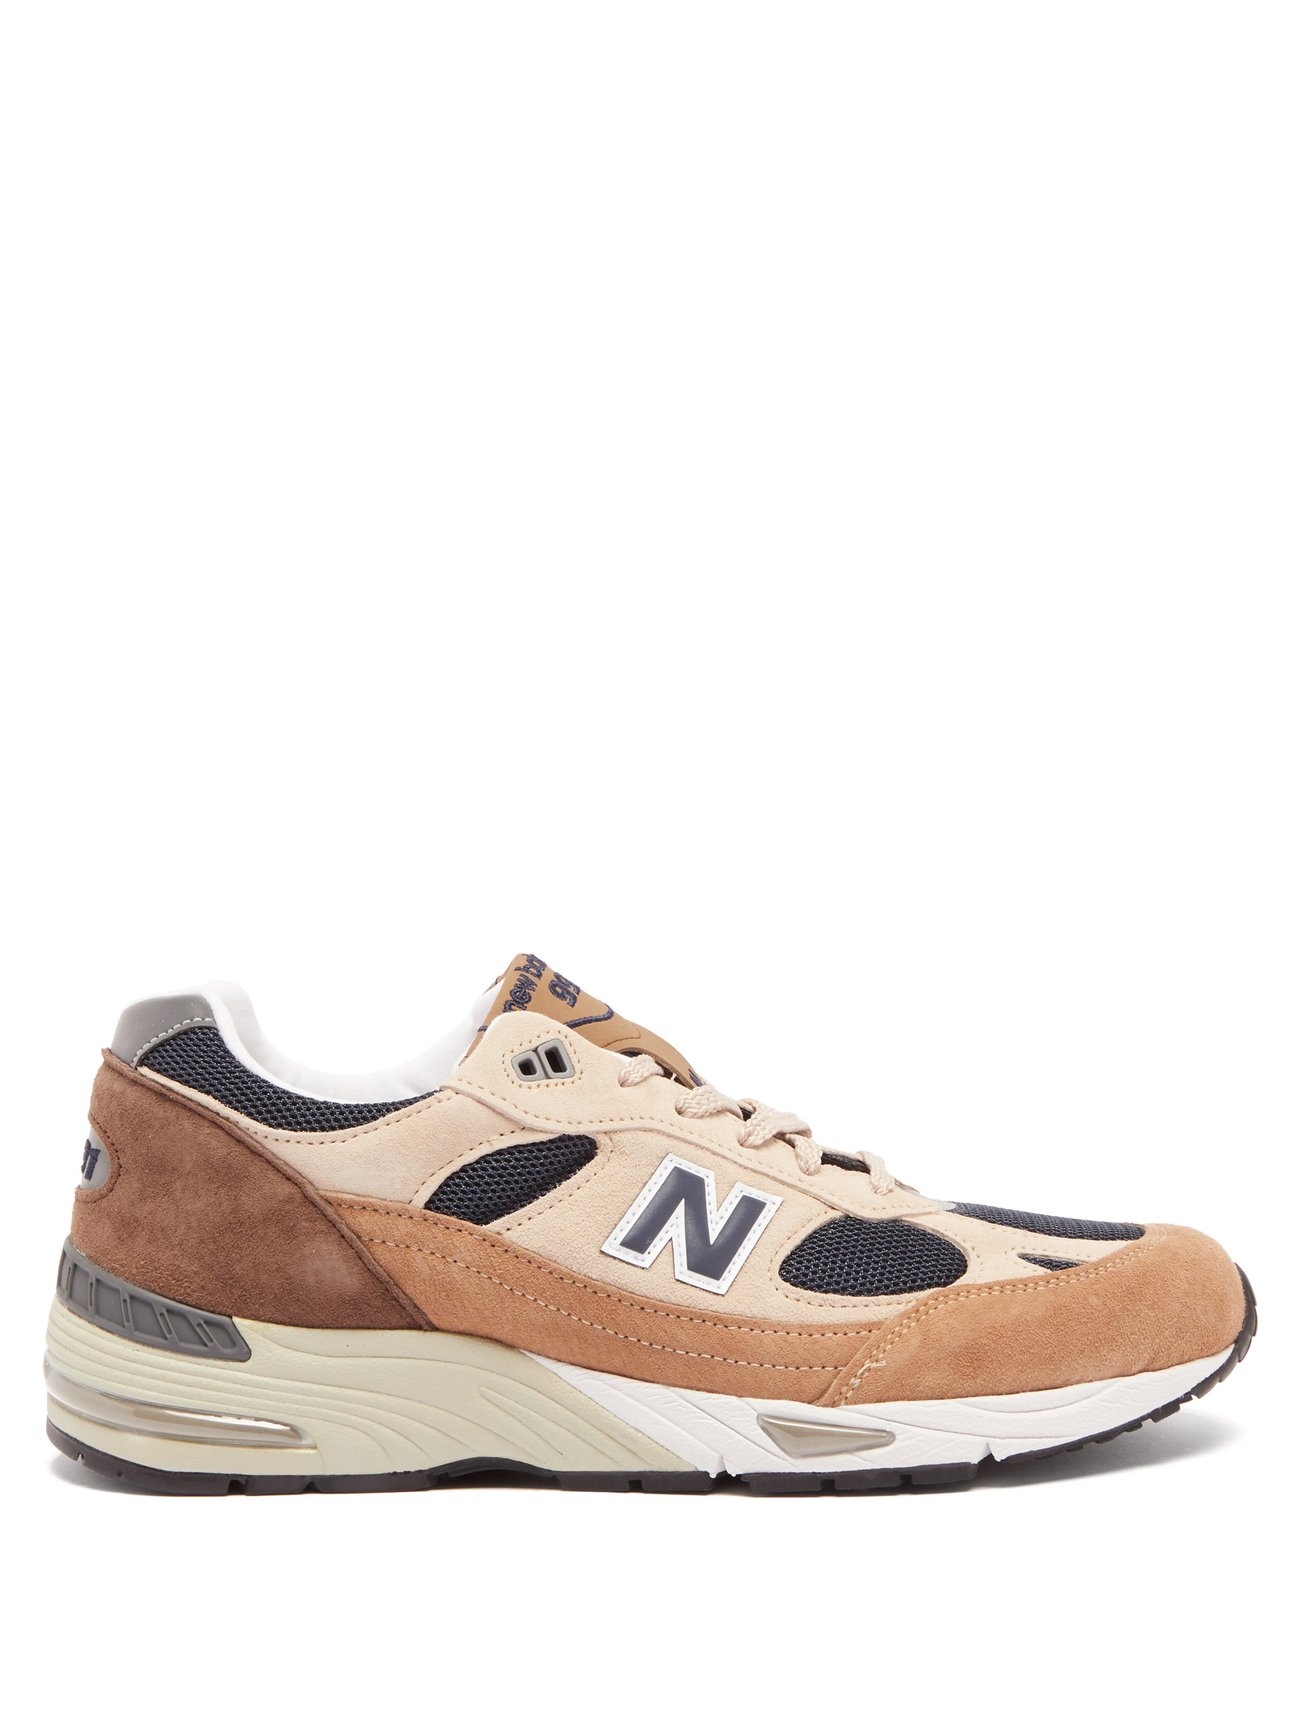 Brown 991 suede and mesh trainers | New Balance 